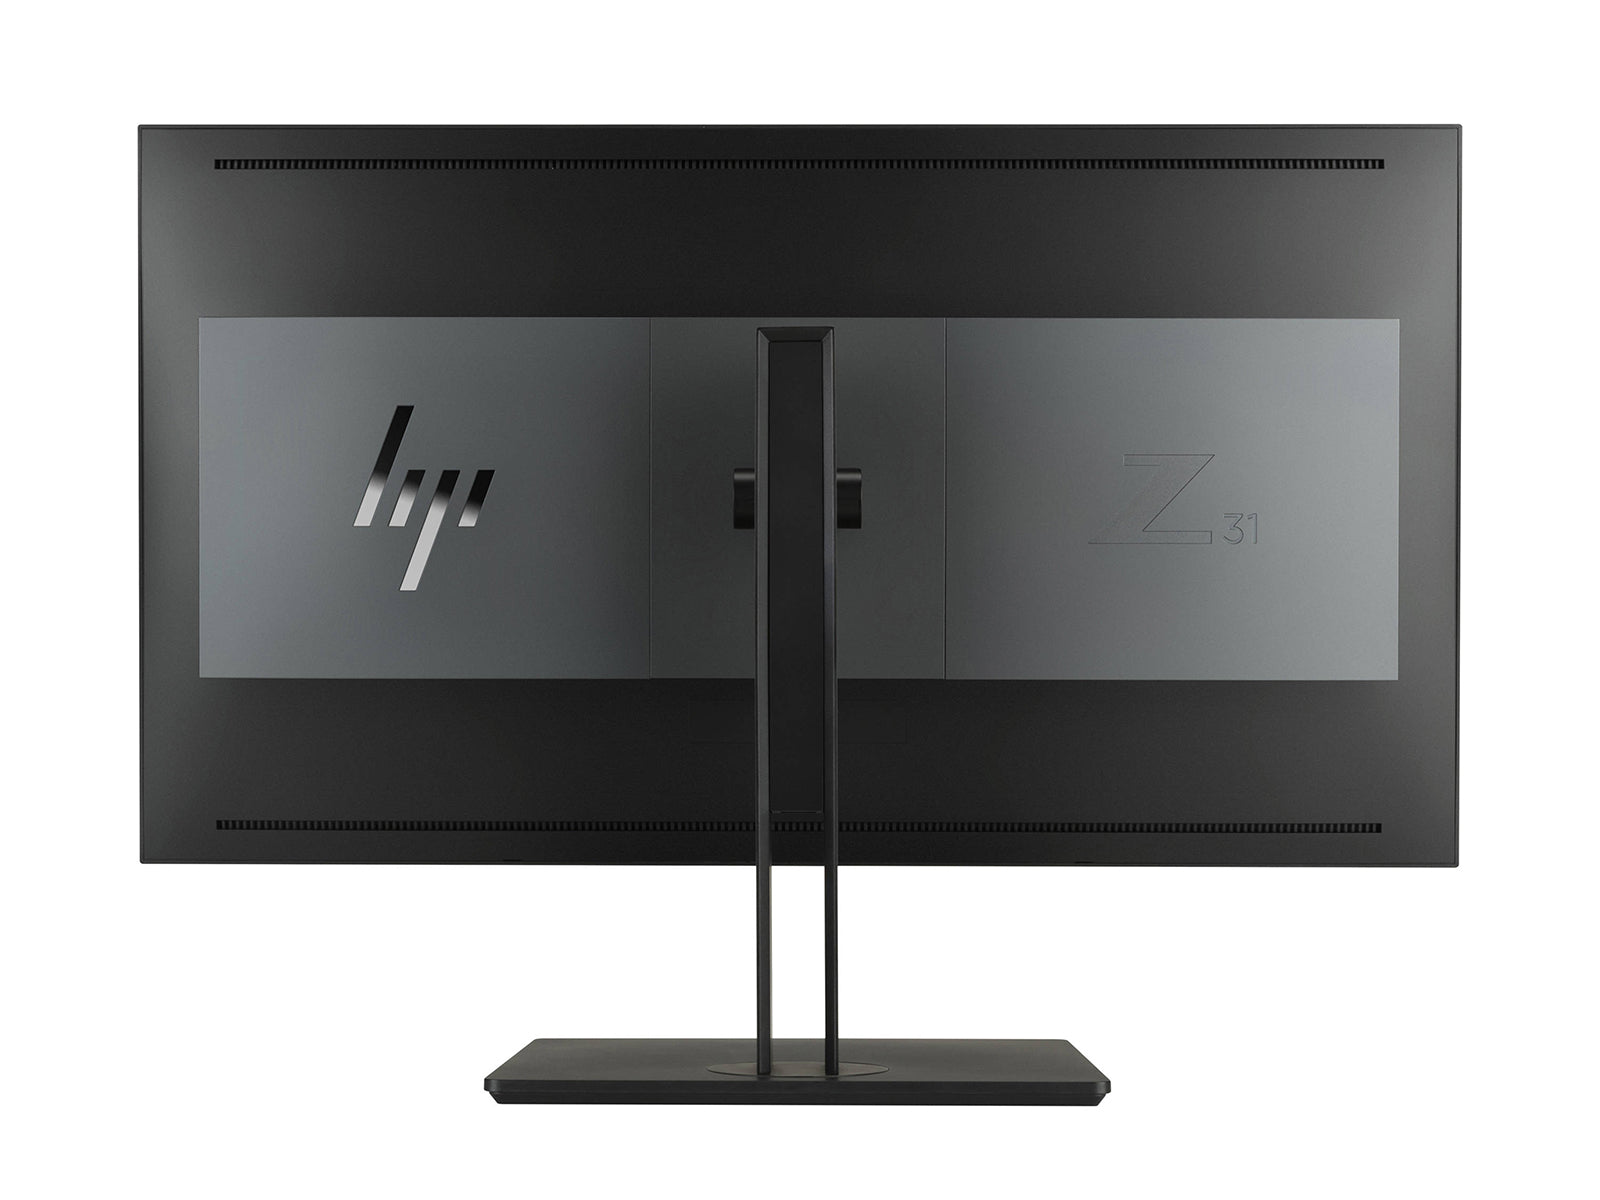 HP DreamColor Z31x 4K 31 インチ カラー LED ディスプレイ モニター (Z4Y82A8#ABA) Monitors.com